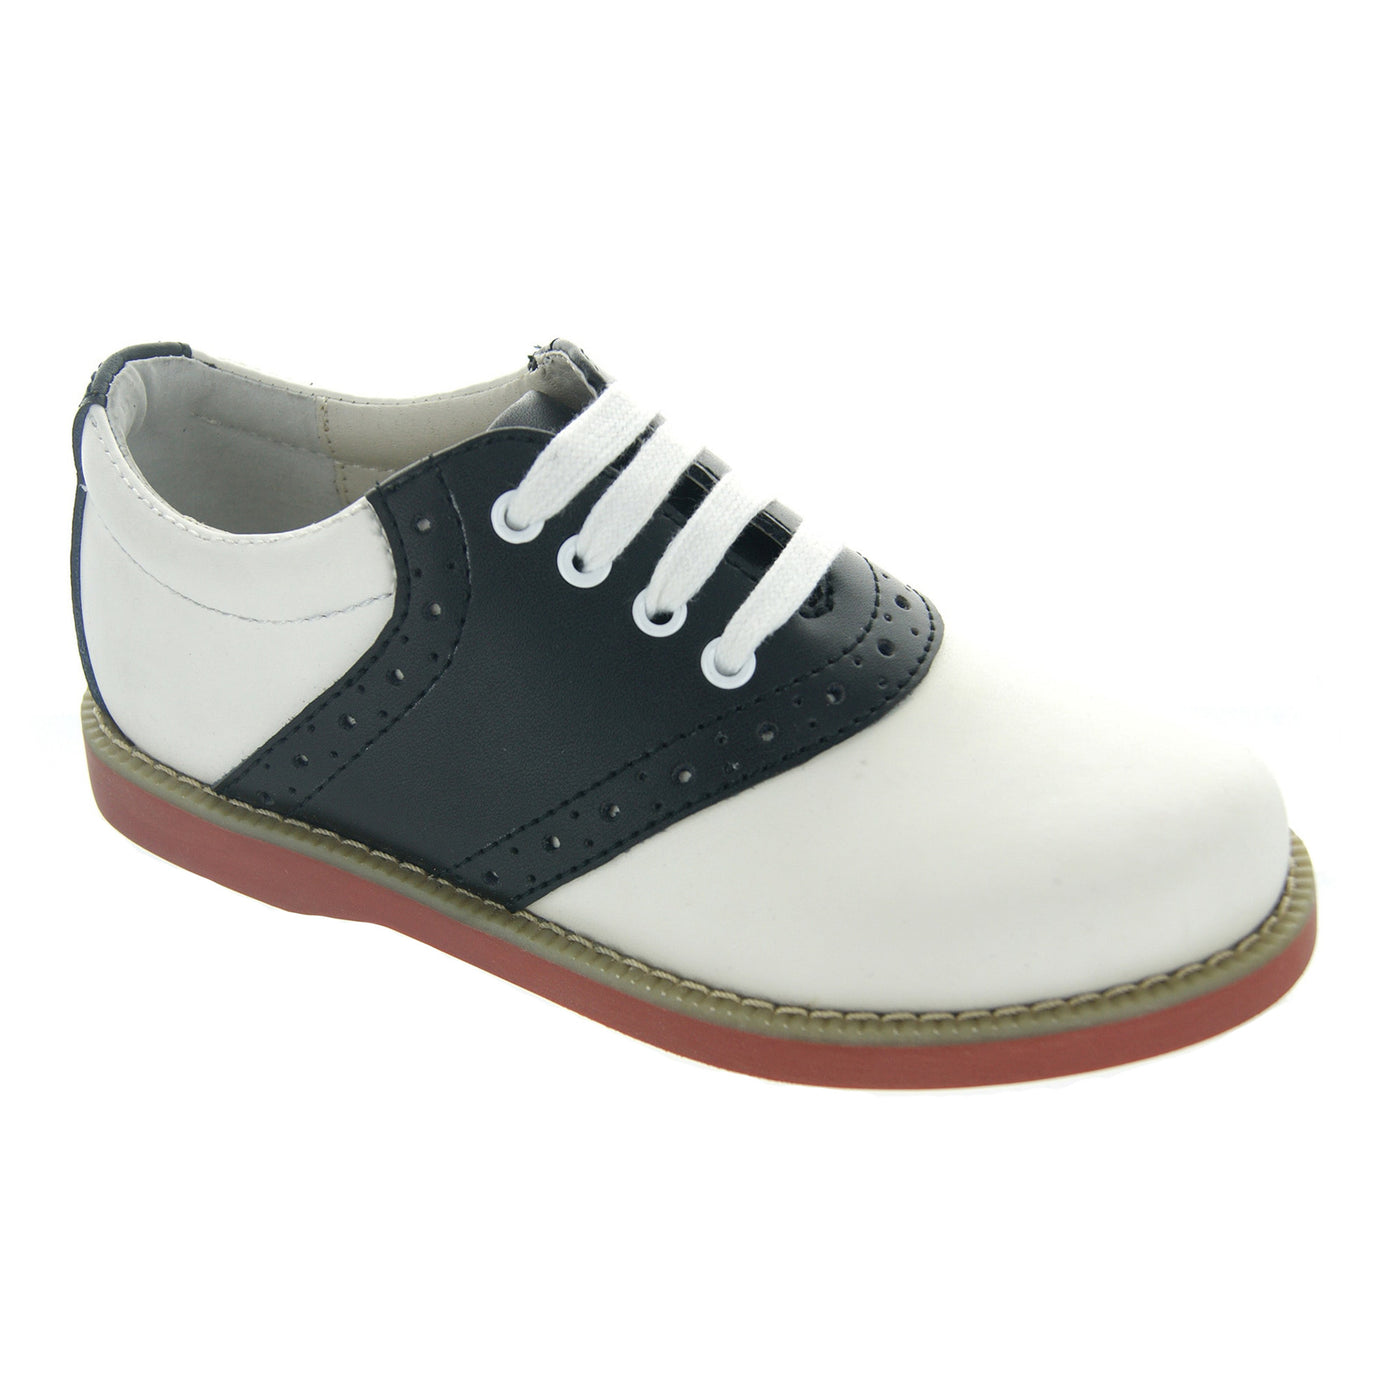 black and white oxford shoes womens